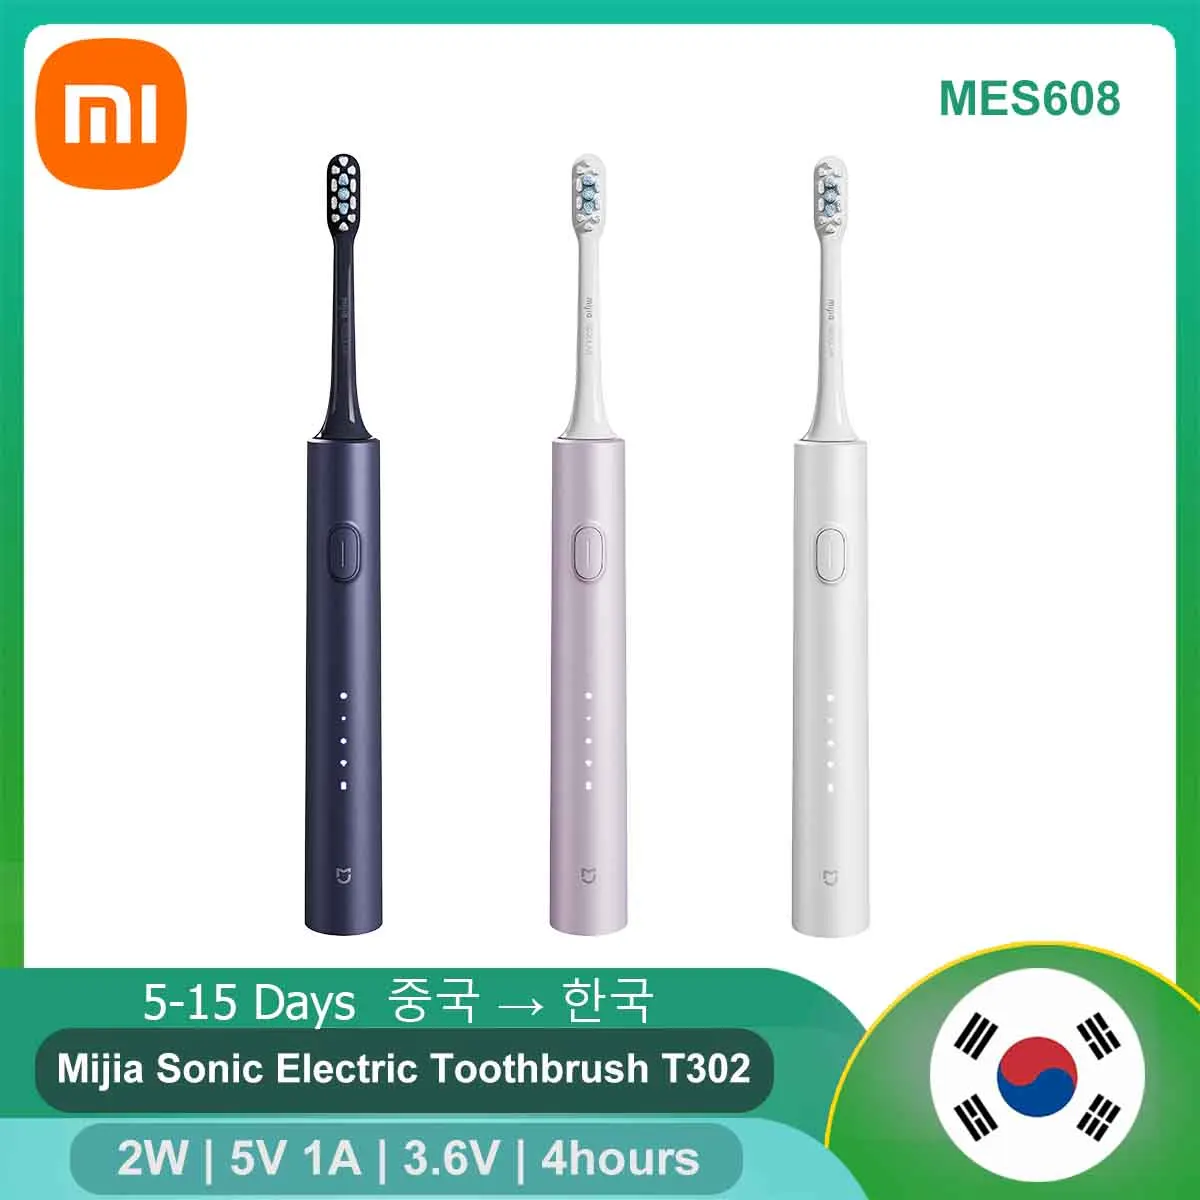 

Xiaomi Mijia Sonic Electric Toothbrush T302 MES608 2W with 4 Brush Head Strengthened power under pressure 4-speed cleaning mode